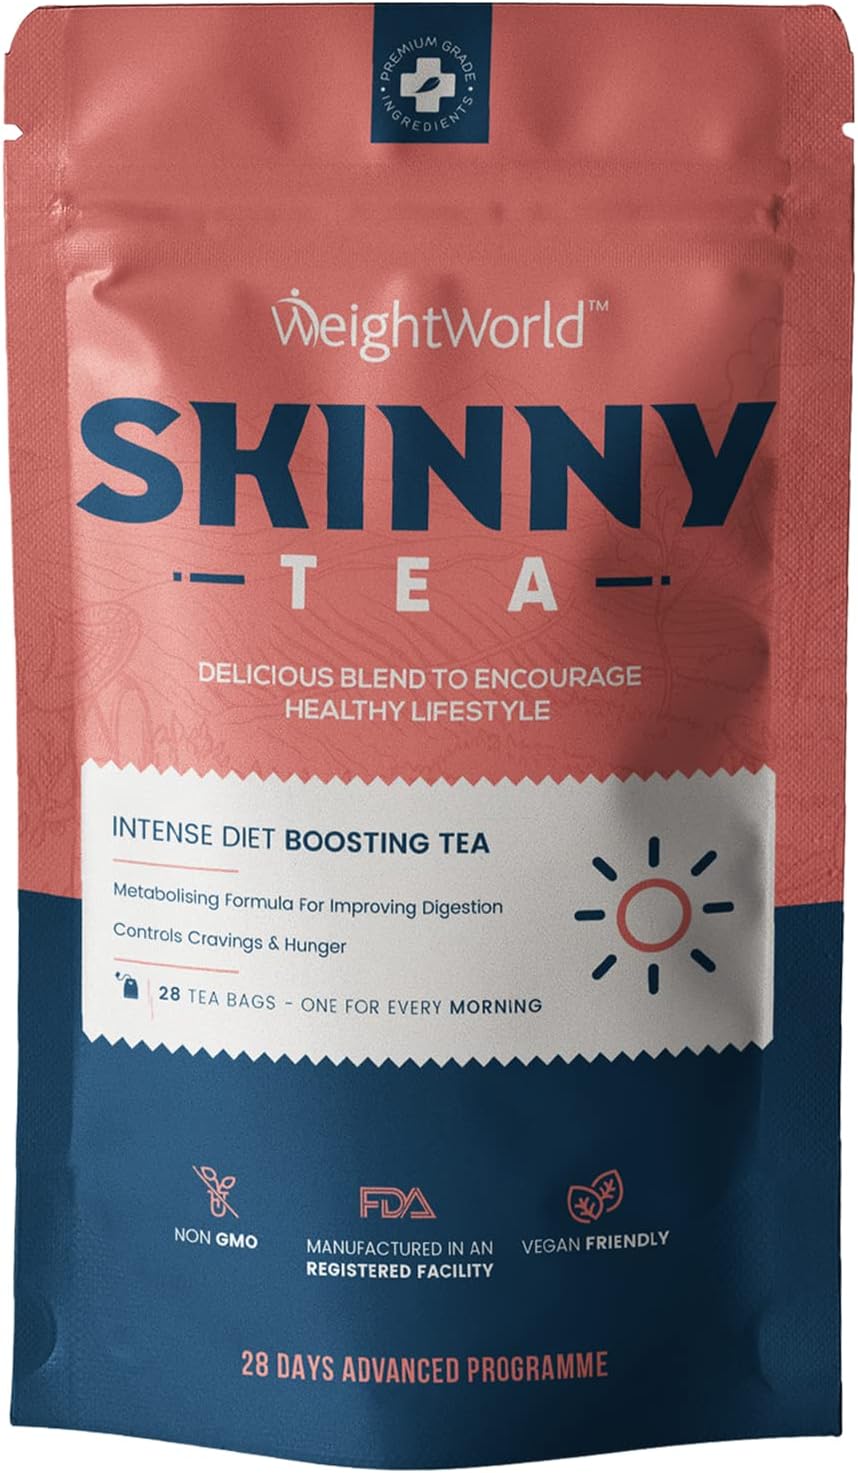 Weightworld Skinny Tea 28 Day Diet Cleanse Morning Tea RRP 9.99 CLEARANCE XL 6.99